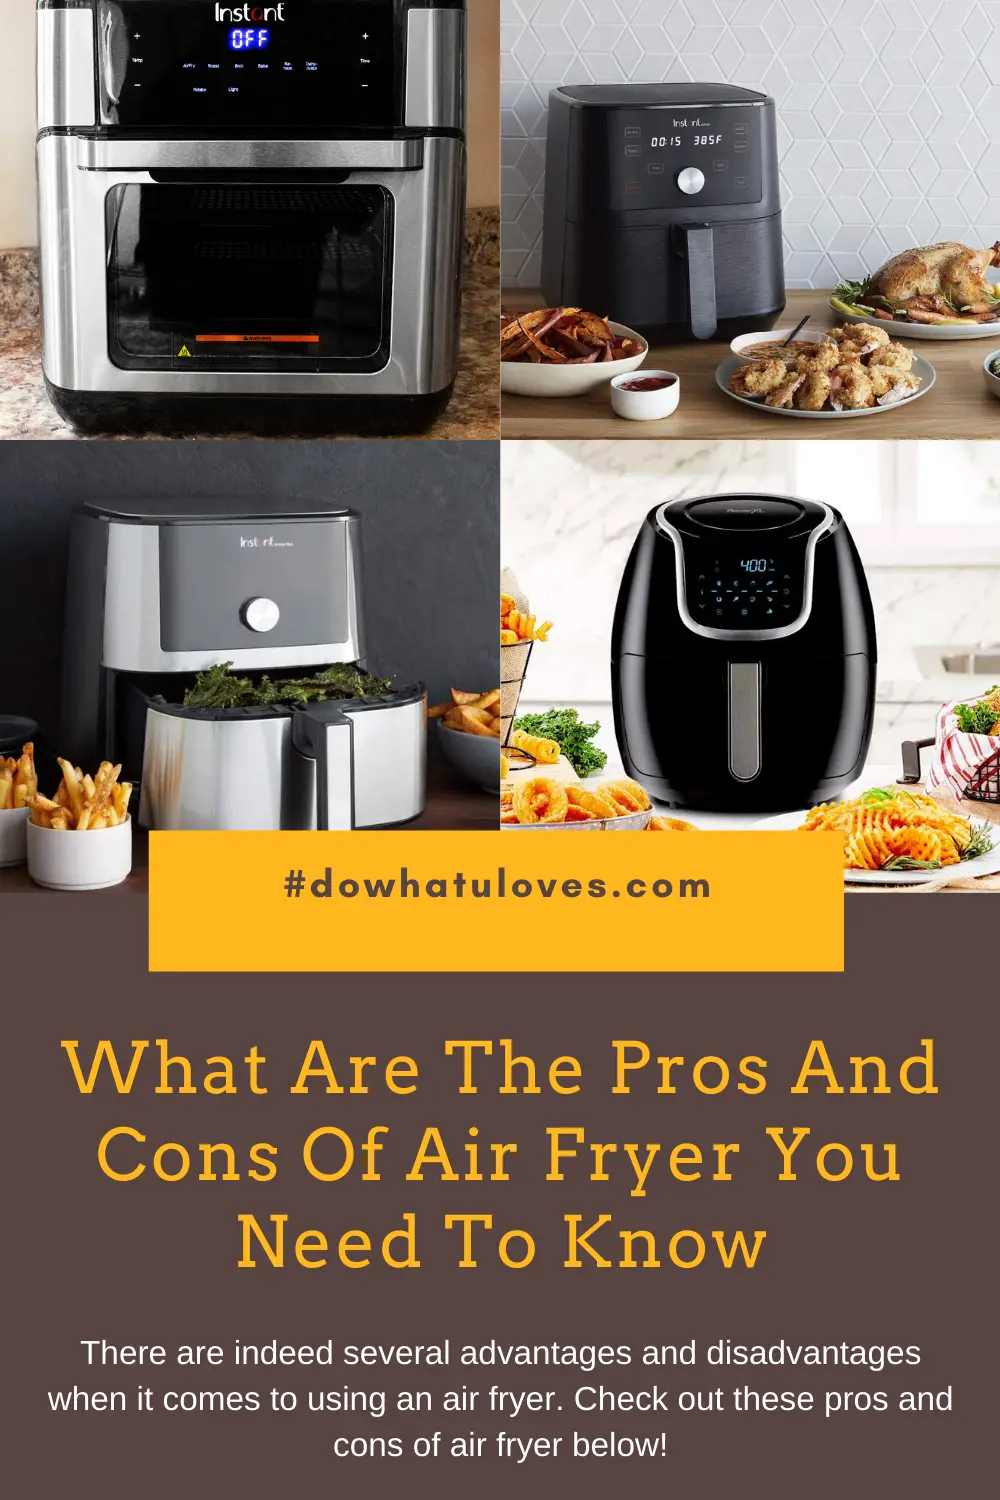 What Are The Pros And Cons Of Air Fryer You Need To Know